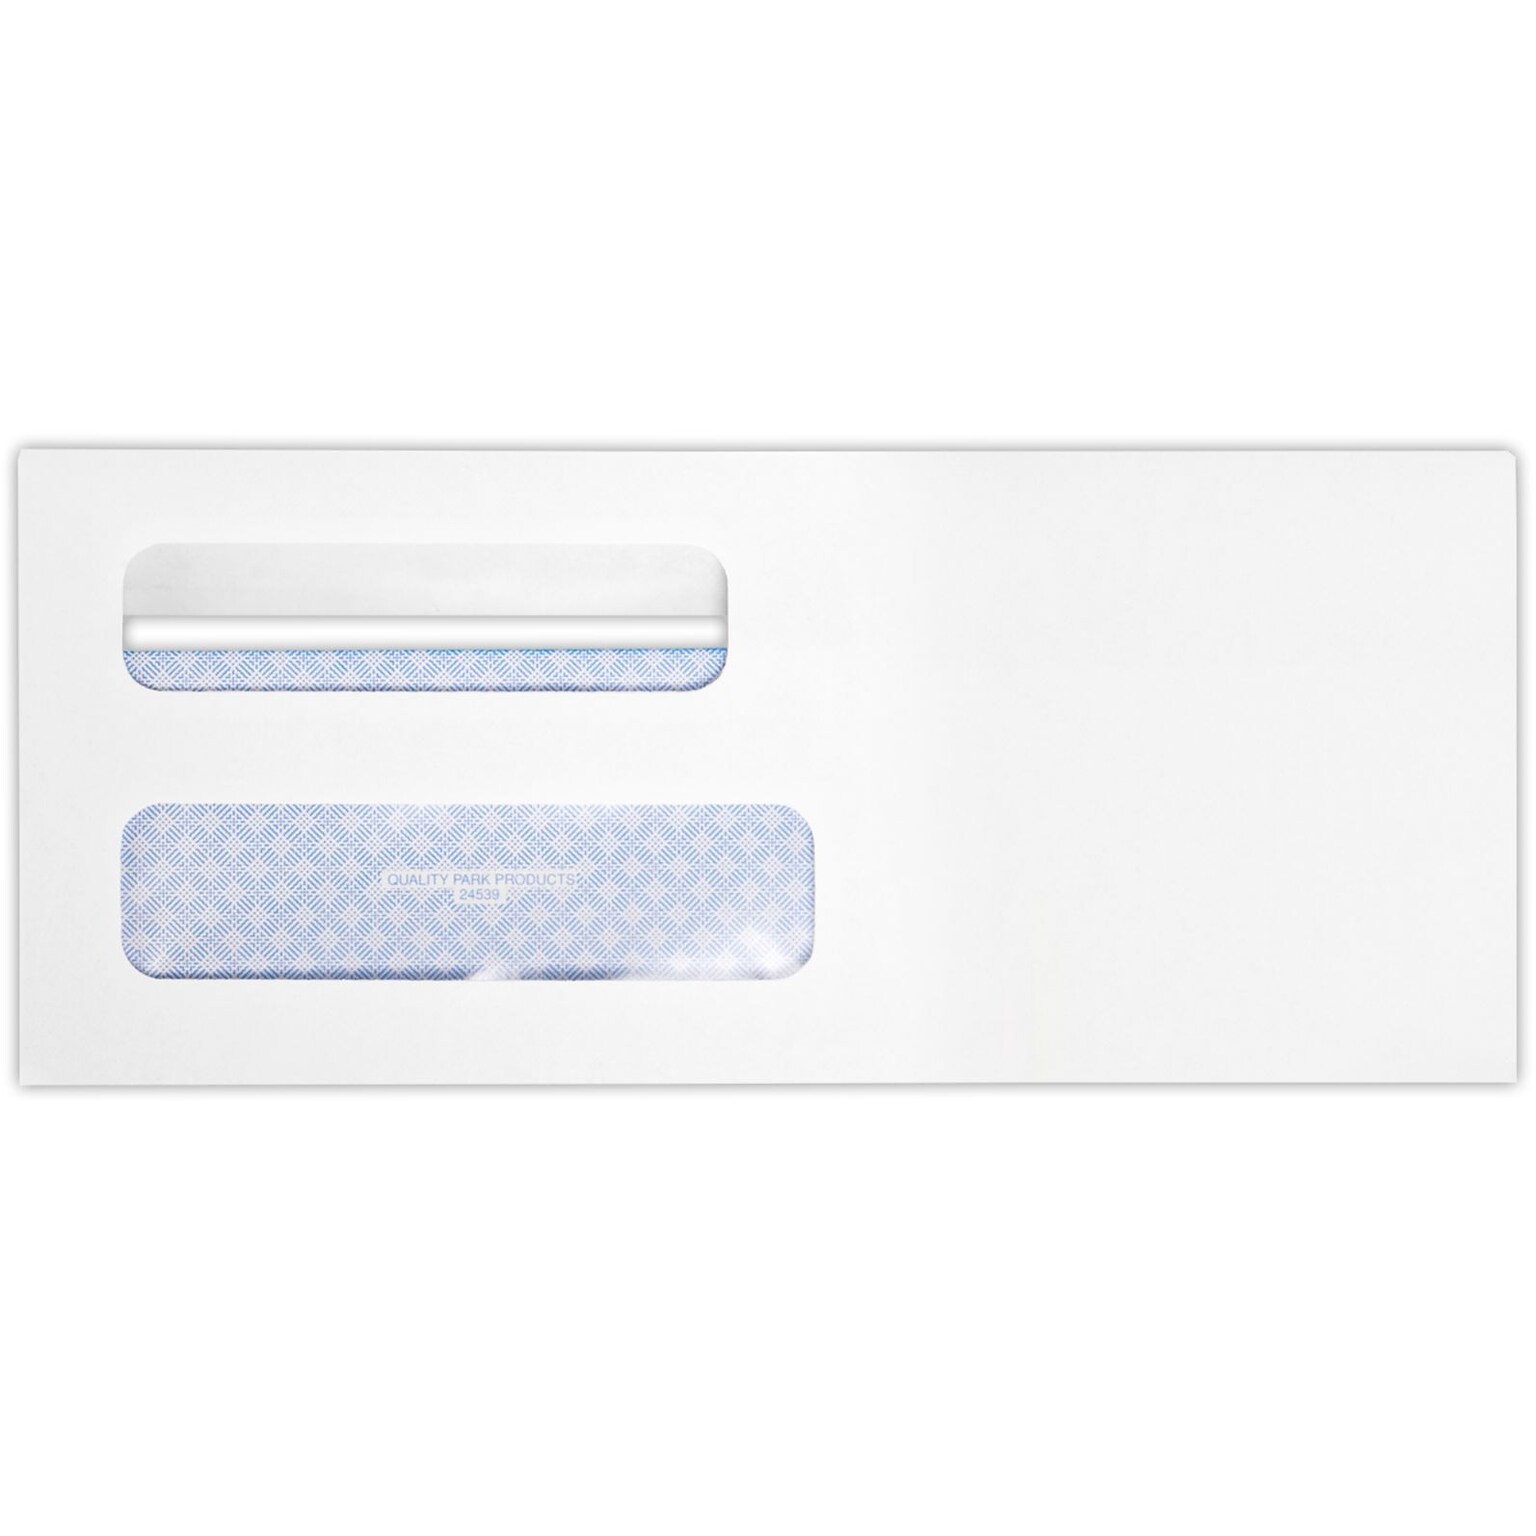 Quality Park Redi-Seal Self Seal Security Tinted #8 Double Window Envelope, 3 5/8 x 8 5/8, White, 250/Pack (24539-250)